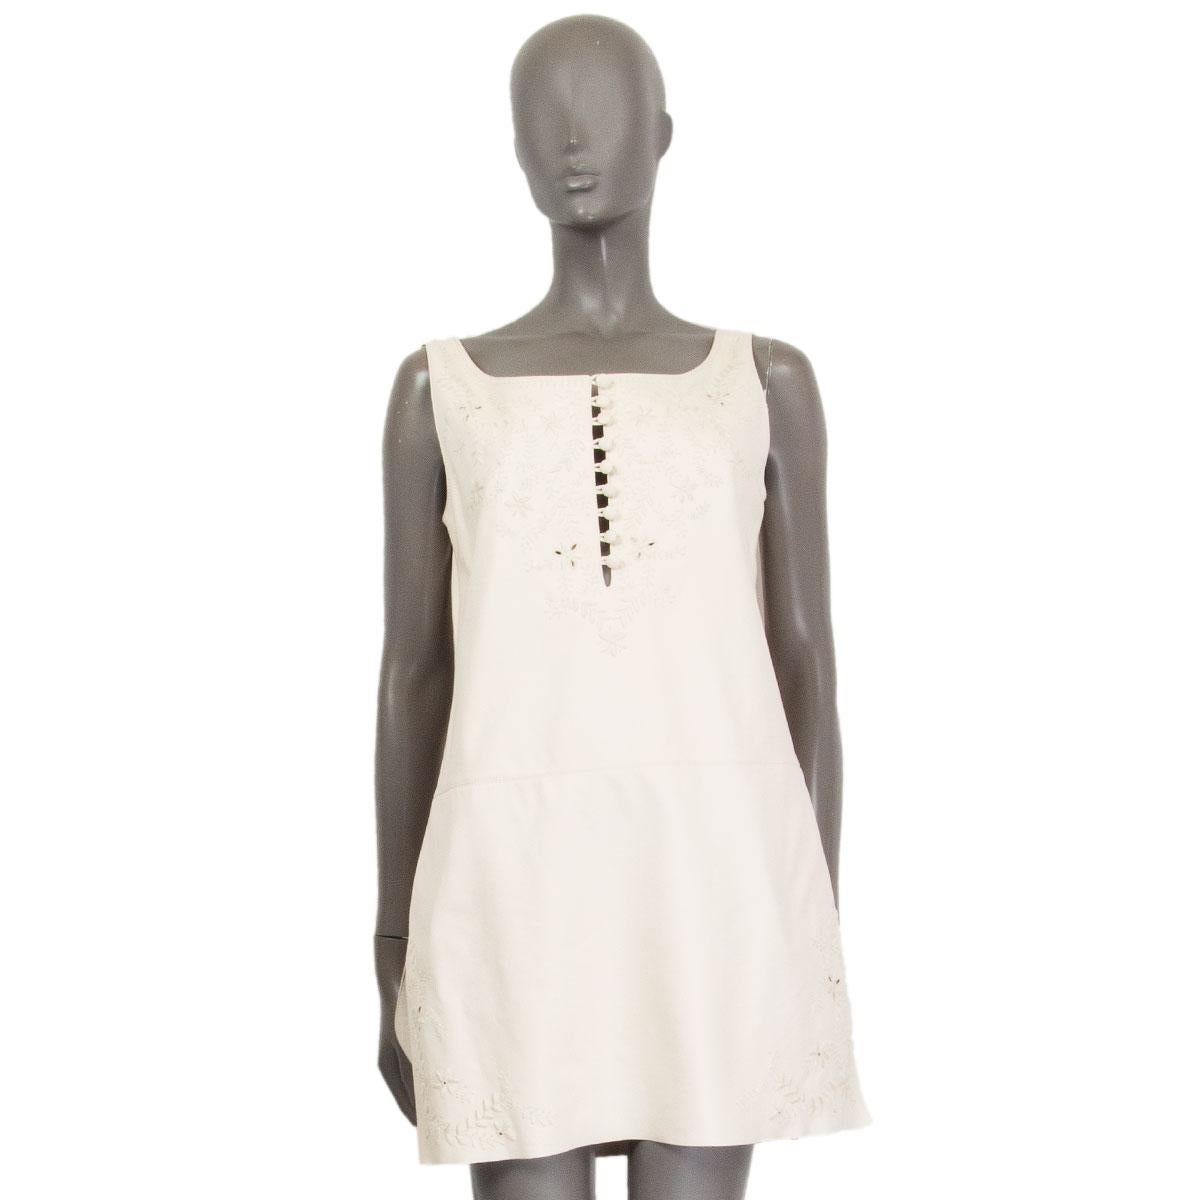 100% authentic Hermes sleeveless shift dress in ivory lambskin (100%) with a seam-cut at the waist-line and floral embellishment  on the chest and at the sides hem. Closes with buttons at the front and has slits on the sides. Lined in ivory silk